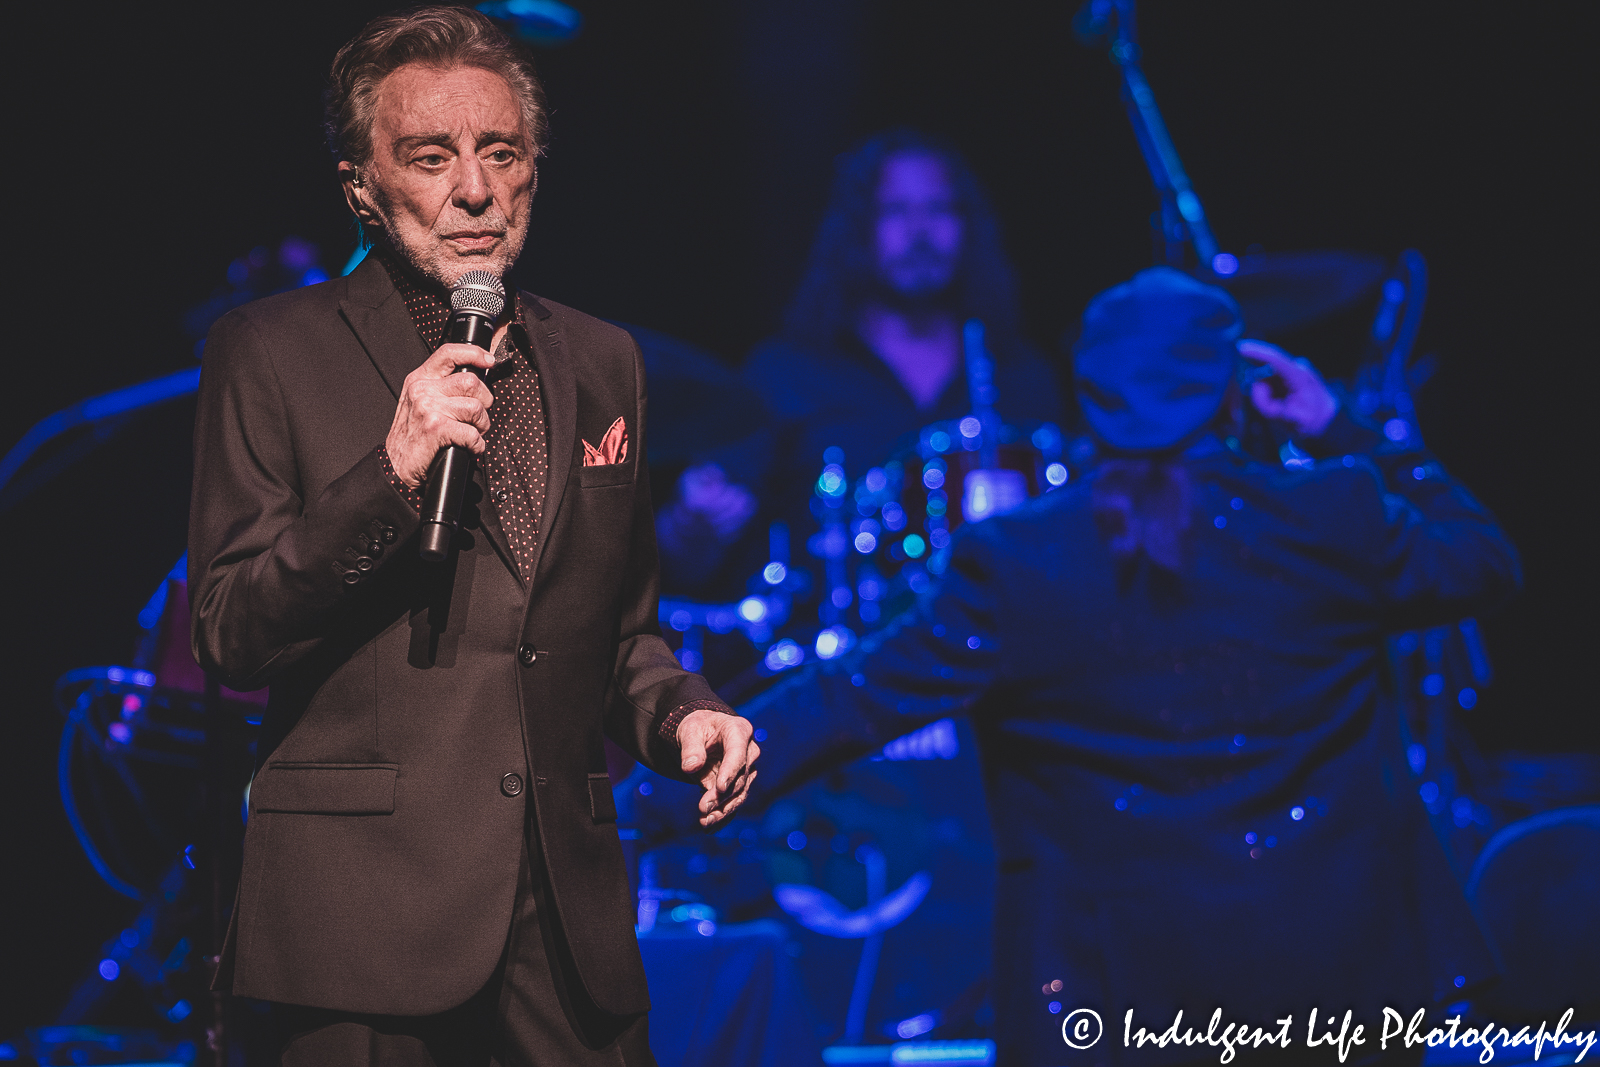 Frankie Valli performing live with music director Robby Robinson at Kauffman Center for the Performing Arts in downtown Kansas City, MO on June 4, 2022.